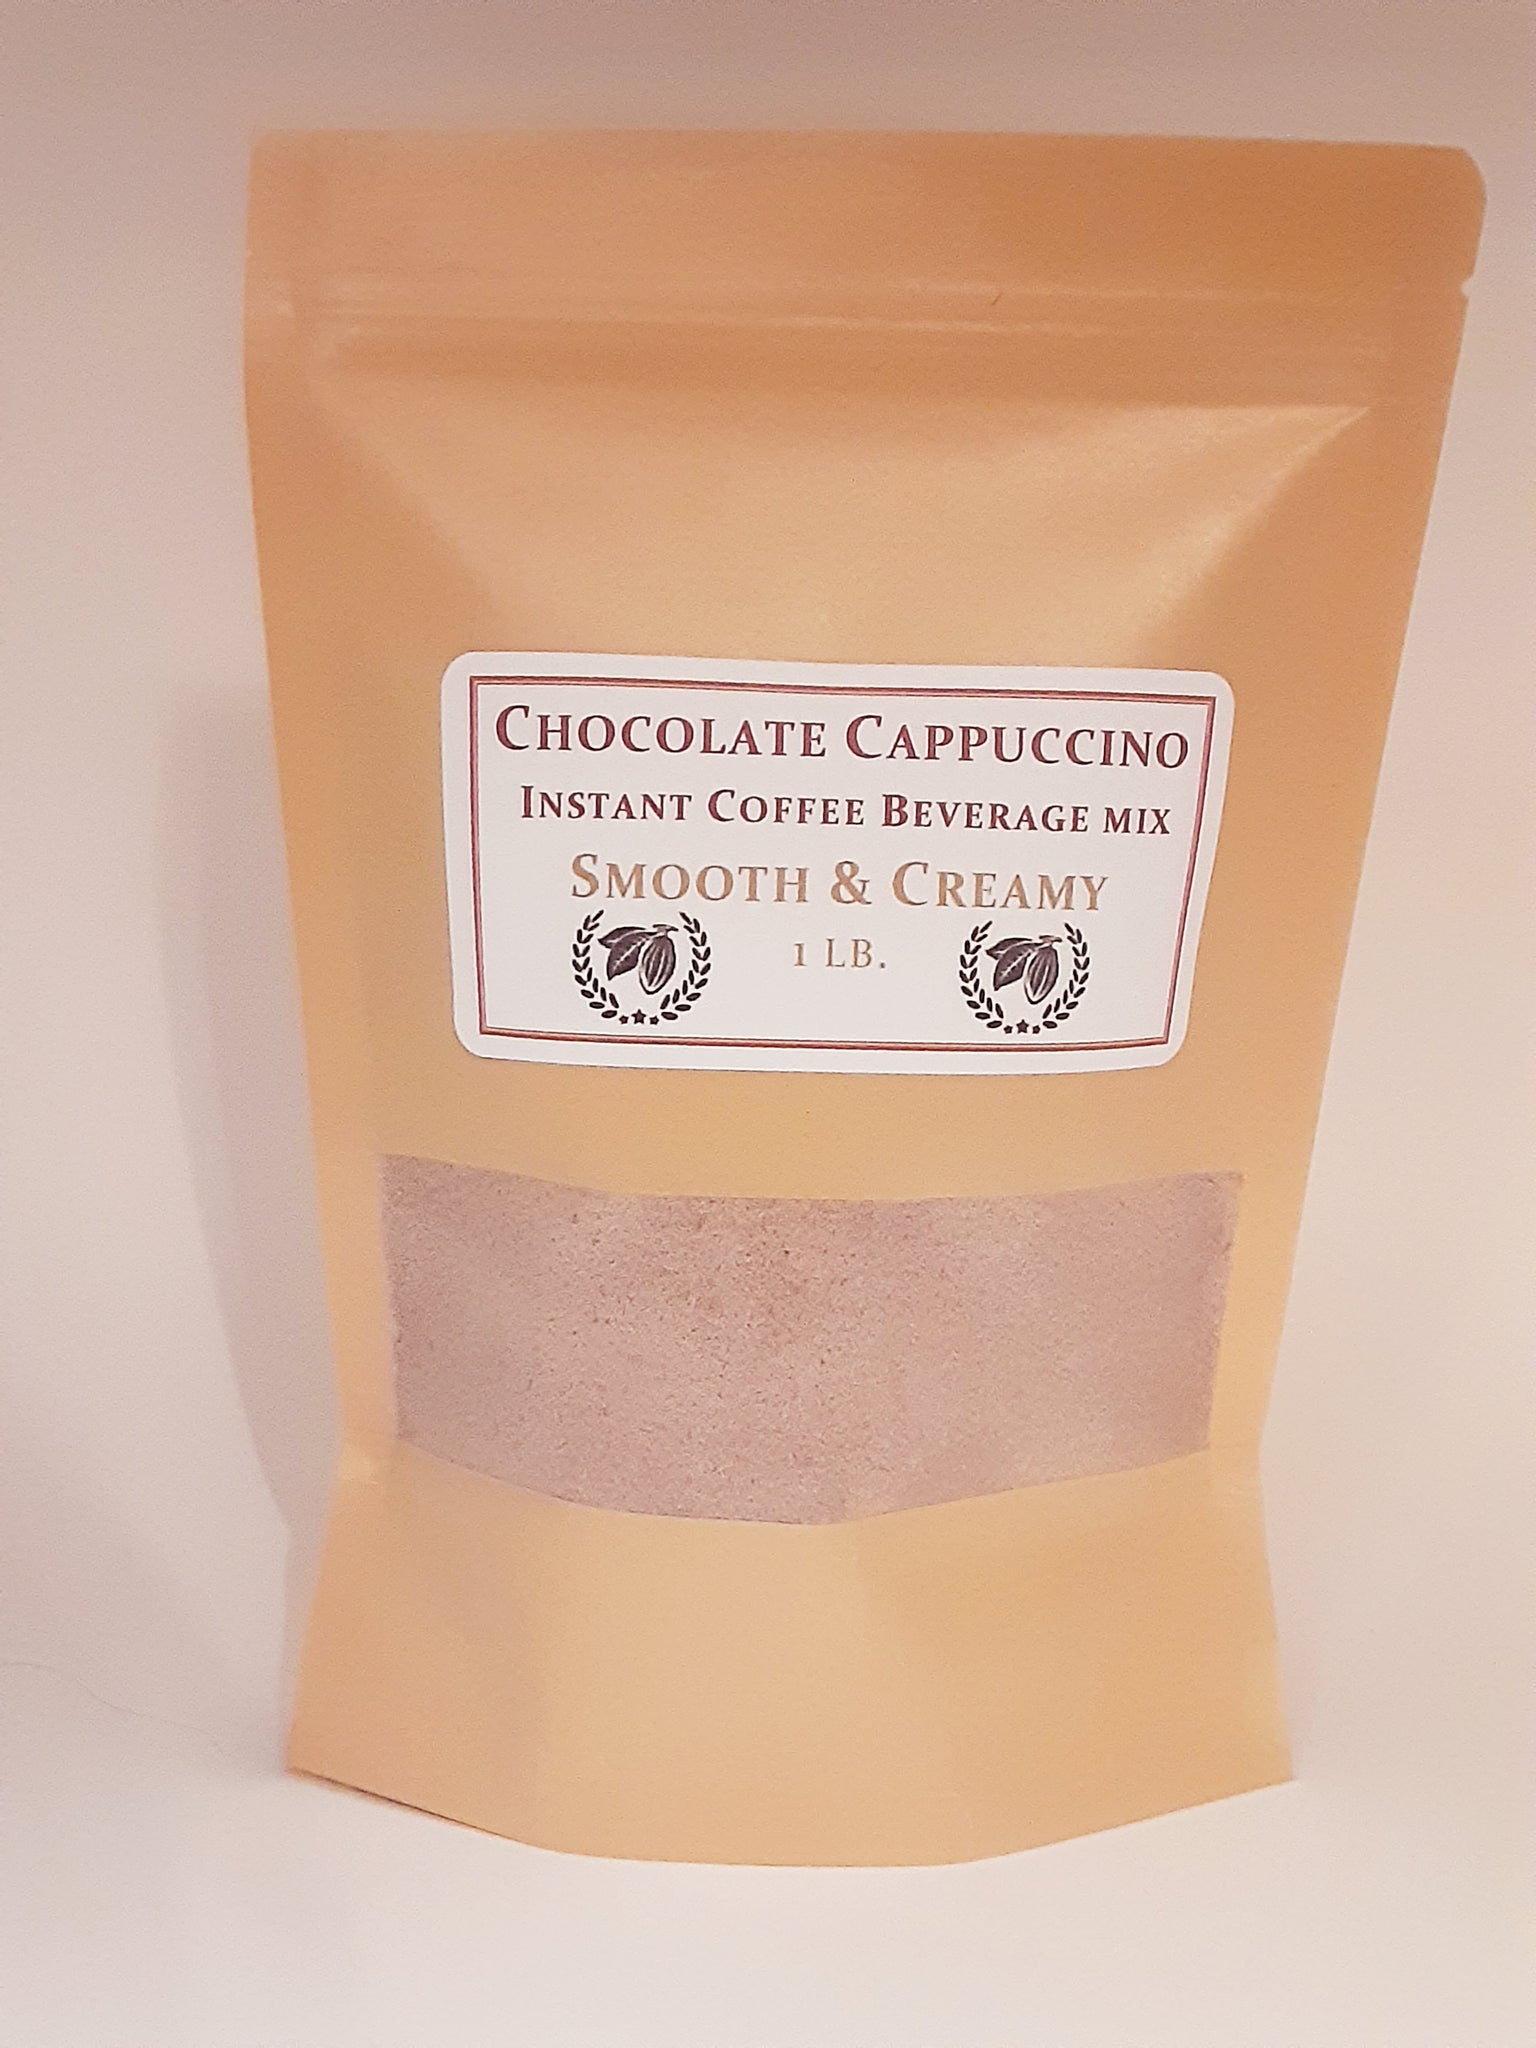 1 lb. Chocolate Cappuccino Instant Coffee Mix